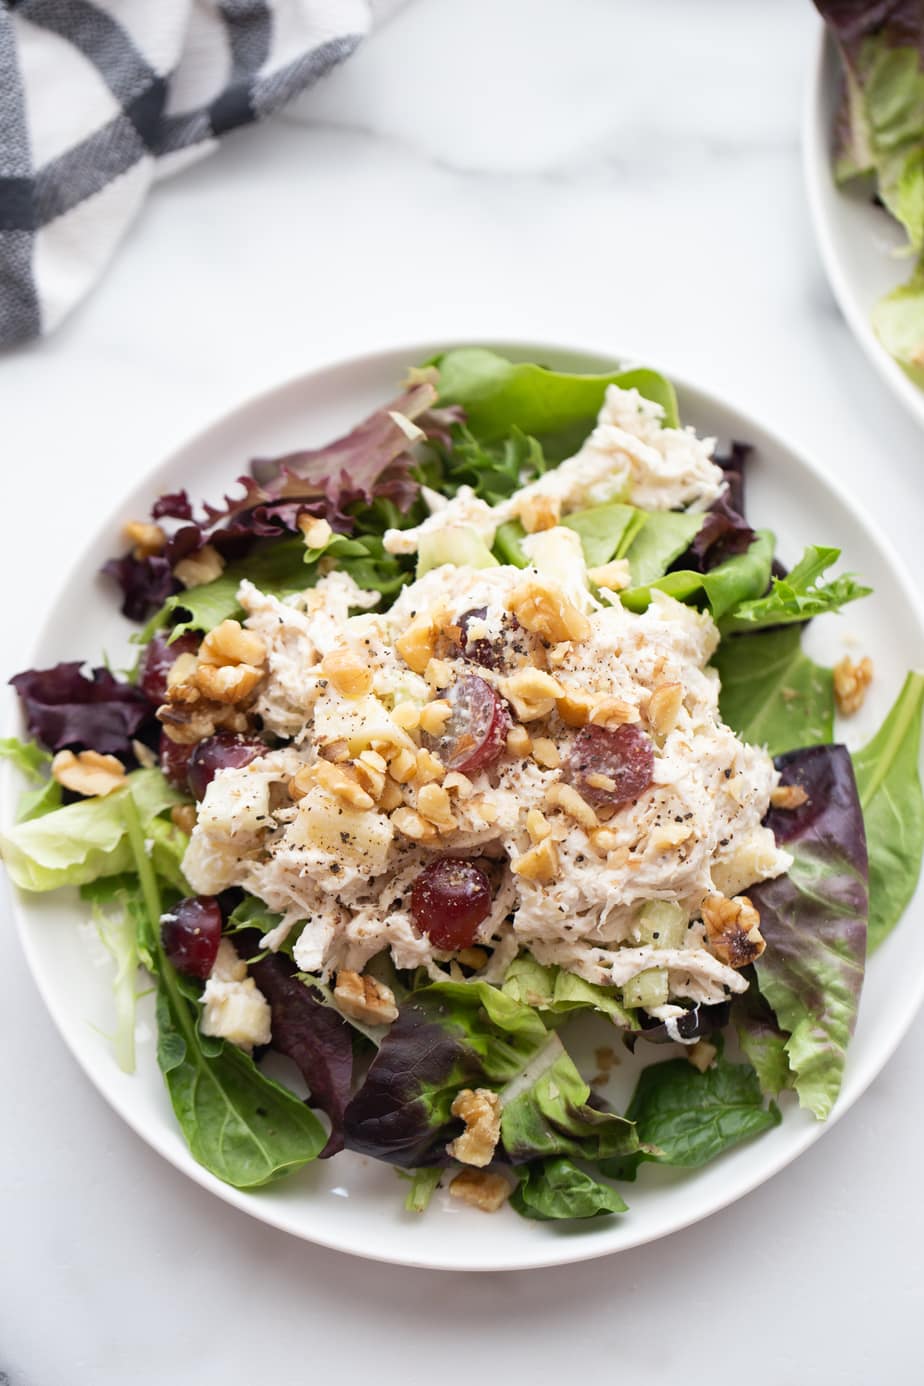 Plate of healthy chicken salad over a bed of lettuce.